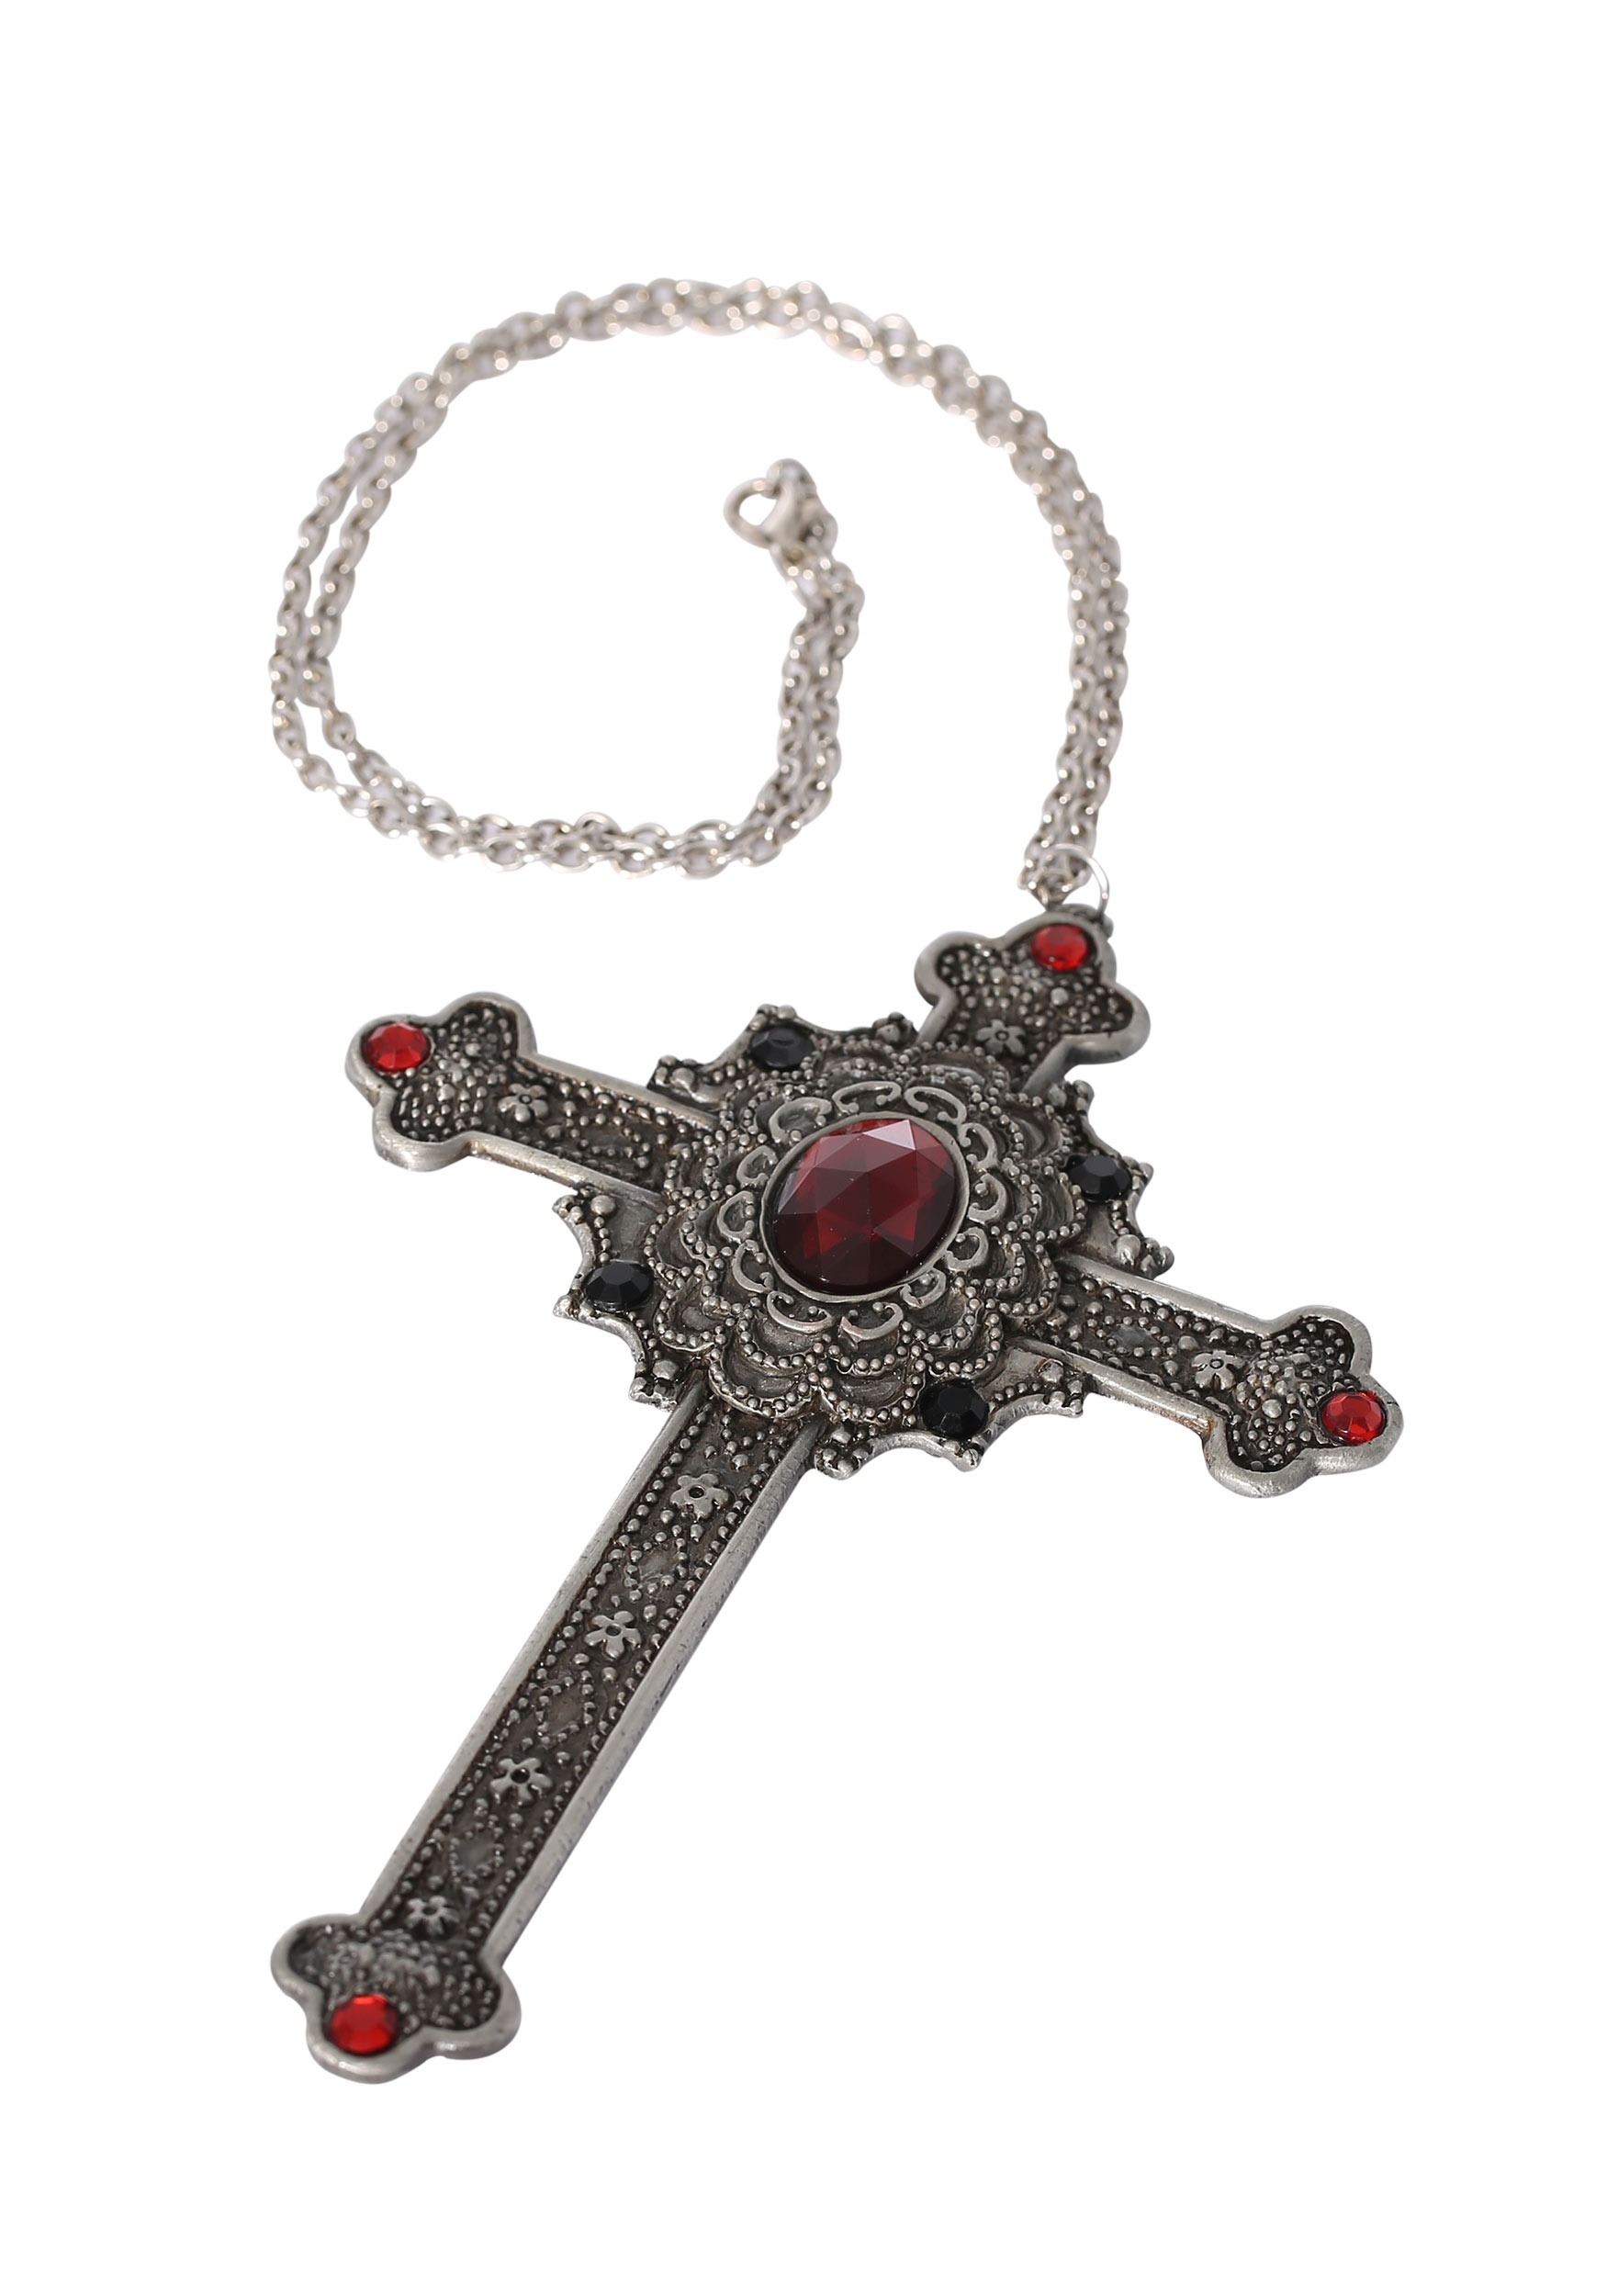 Gothic Cross Necklace Accessory